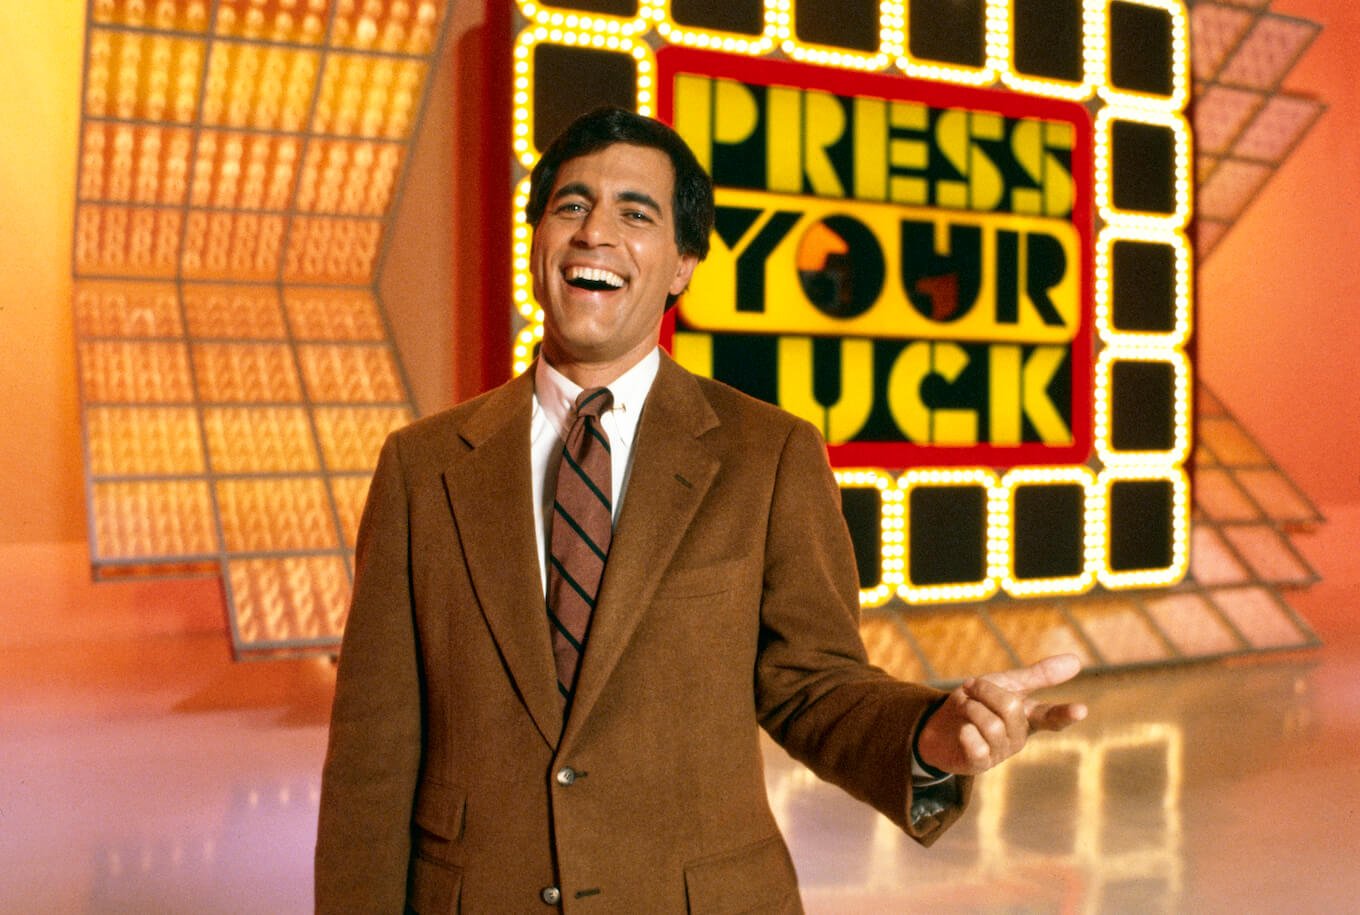 'Press Your Luck' host Peter Tomarken laughing in front of the game show's sign